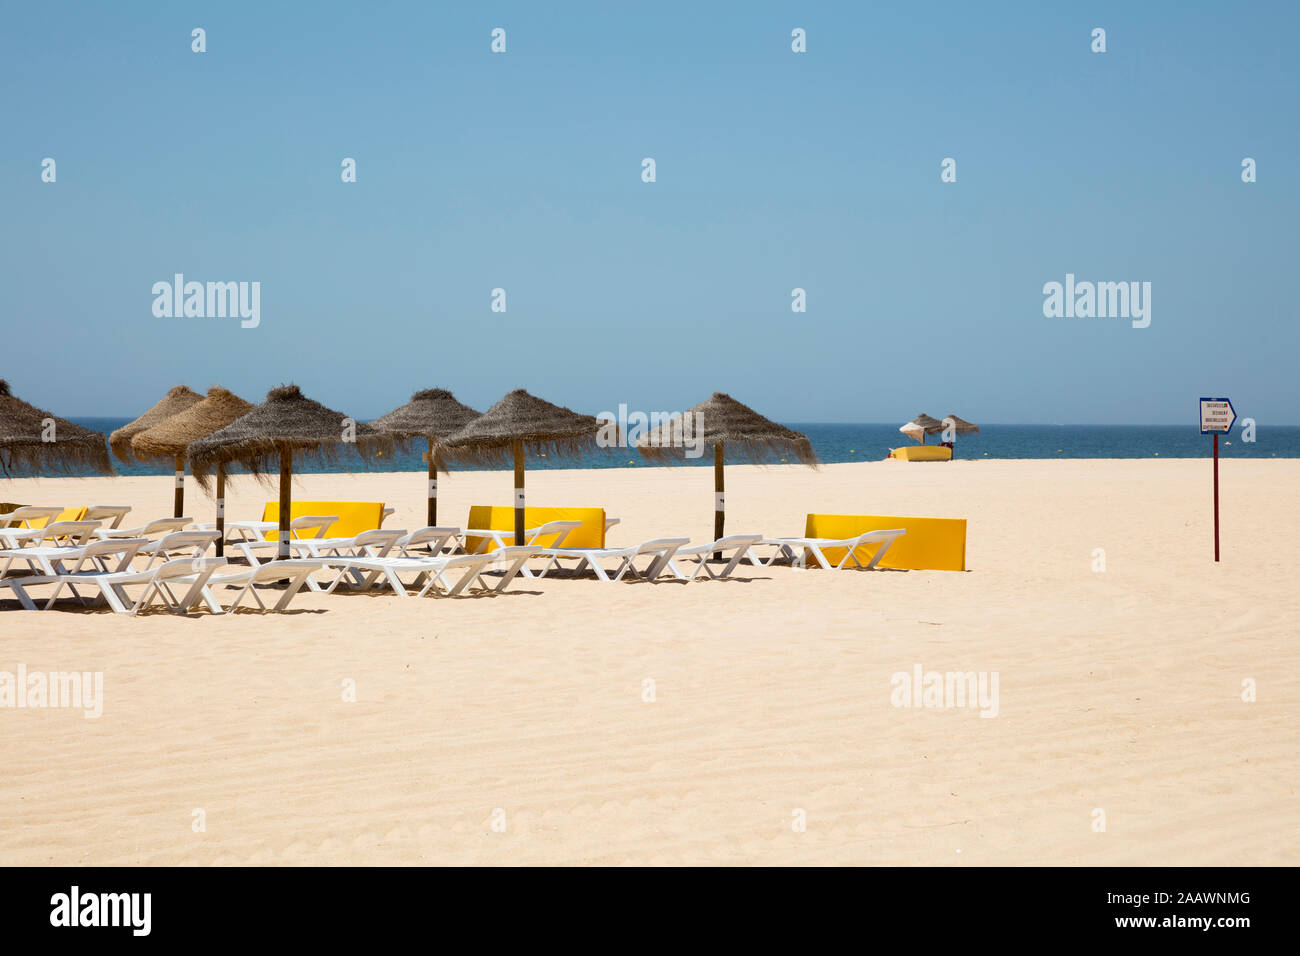 Thatched roof parasols and lounge chairs at sandy beach against clear sky, Albufeira, Algarve, Portugal Stock Photo